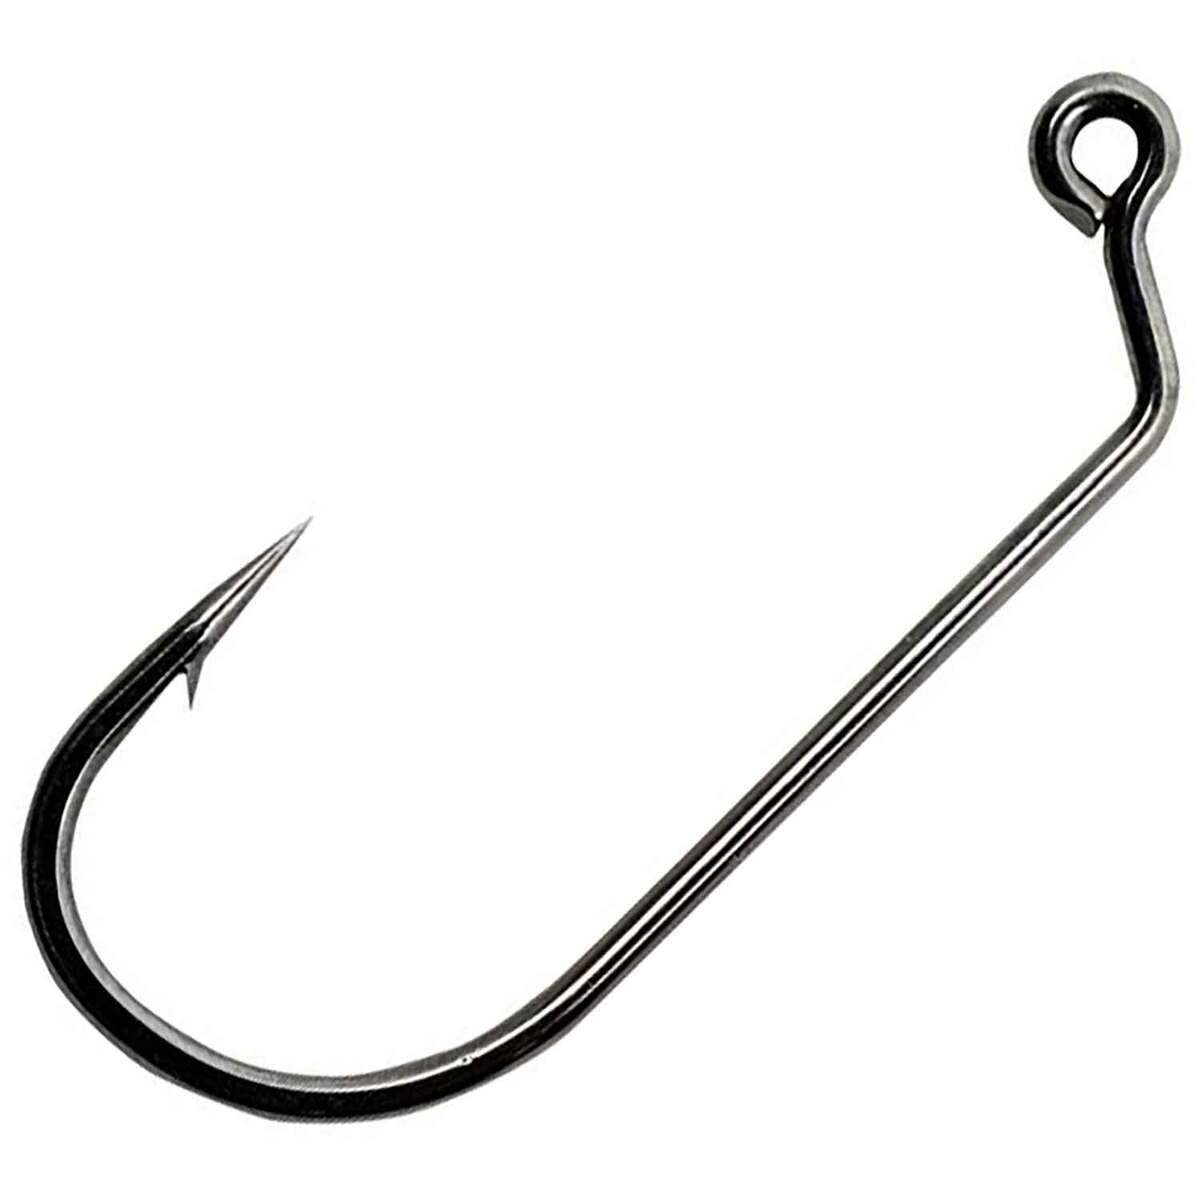 Victory Hooks 10786 60-Degree X Strong Round Bend Jig Hook - 100